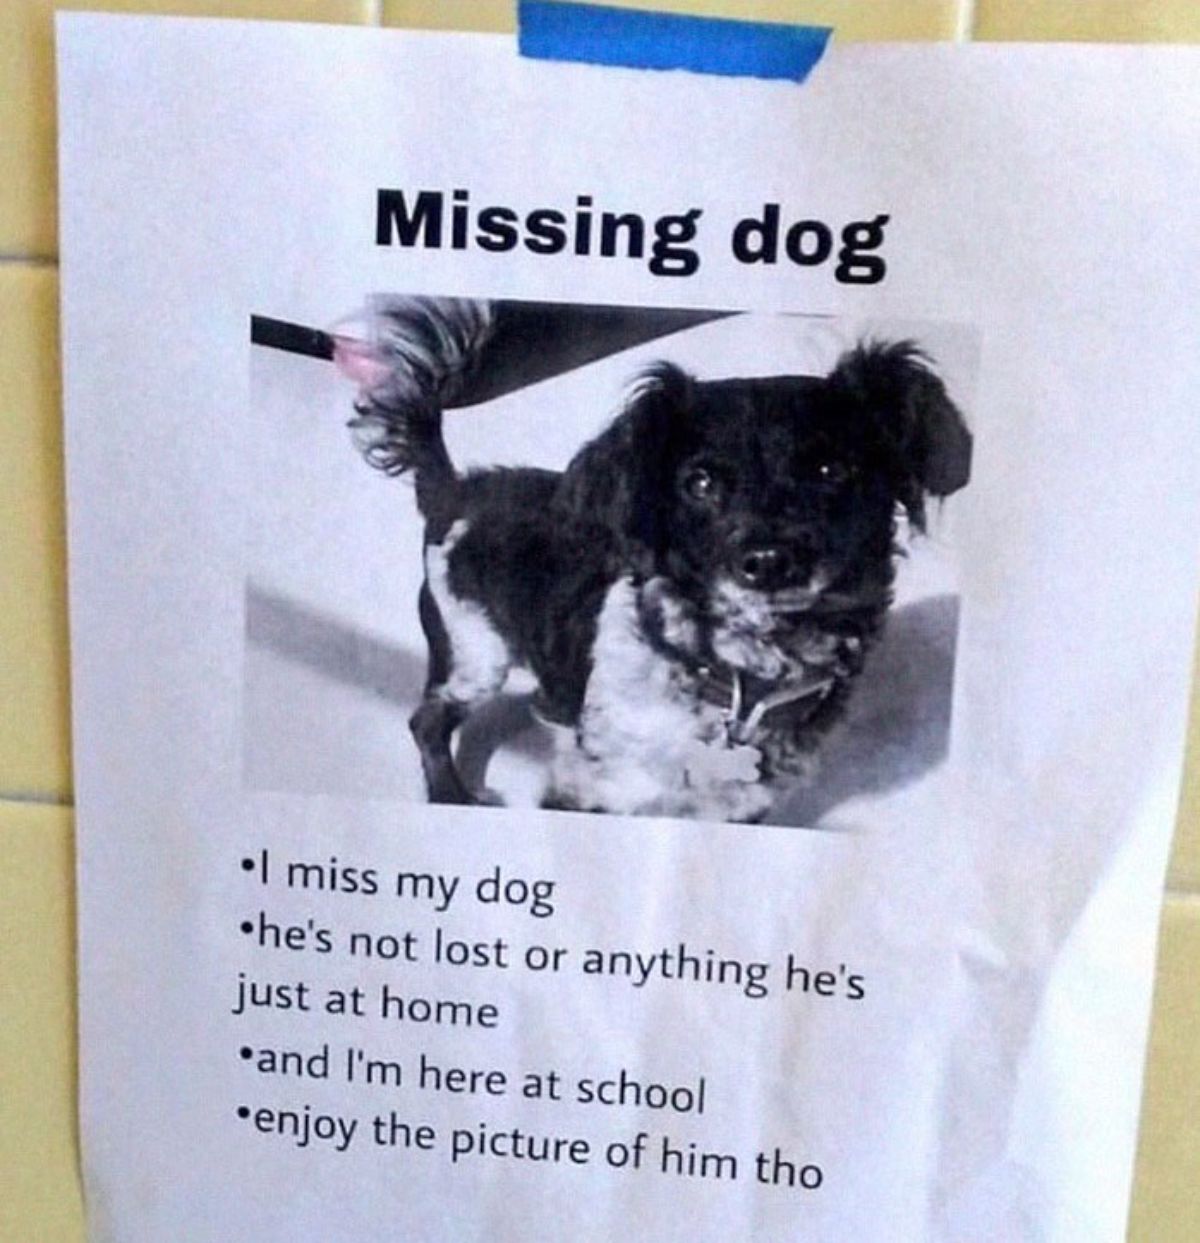 photo of a missing dog poster with a black and whtie dog saying the dog isn't missing but the owner misses the dog because she's in school and the dog is at home